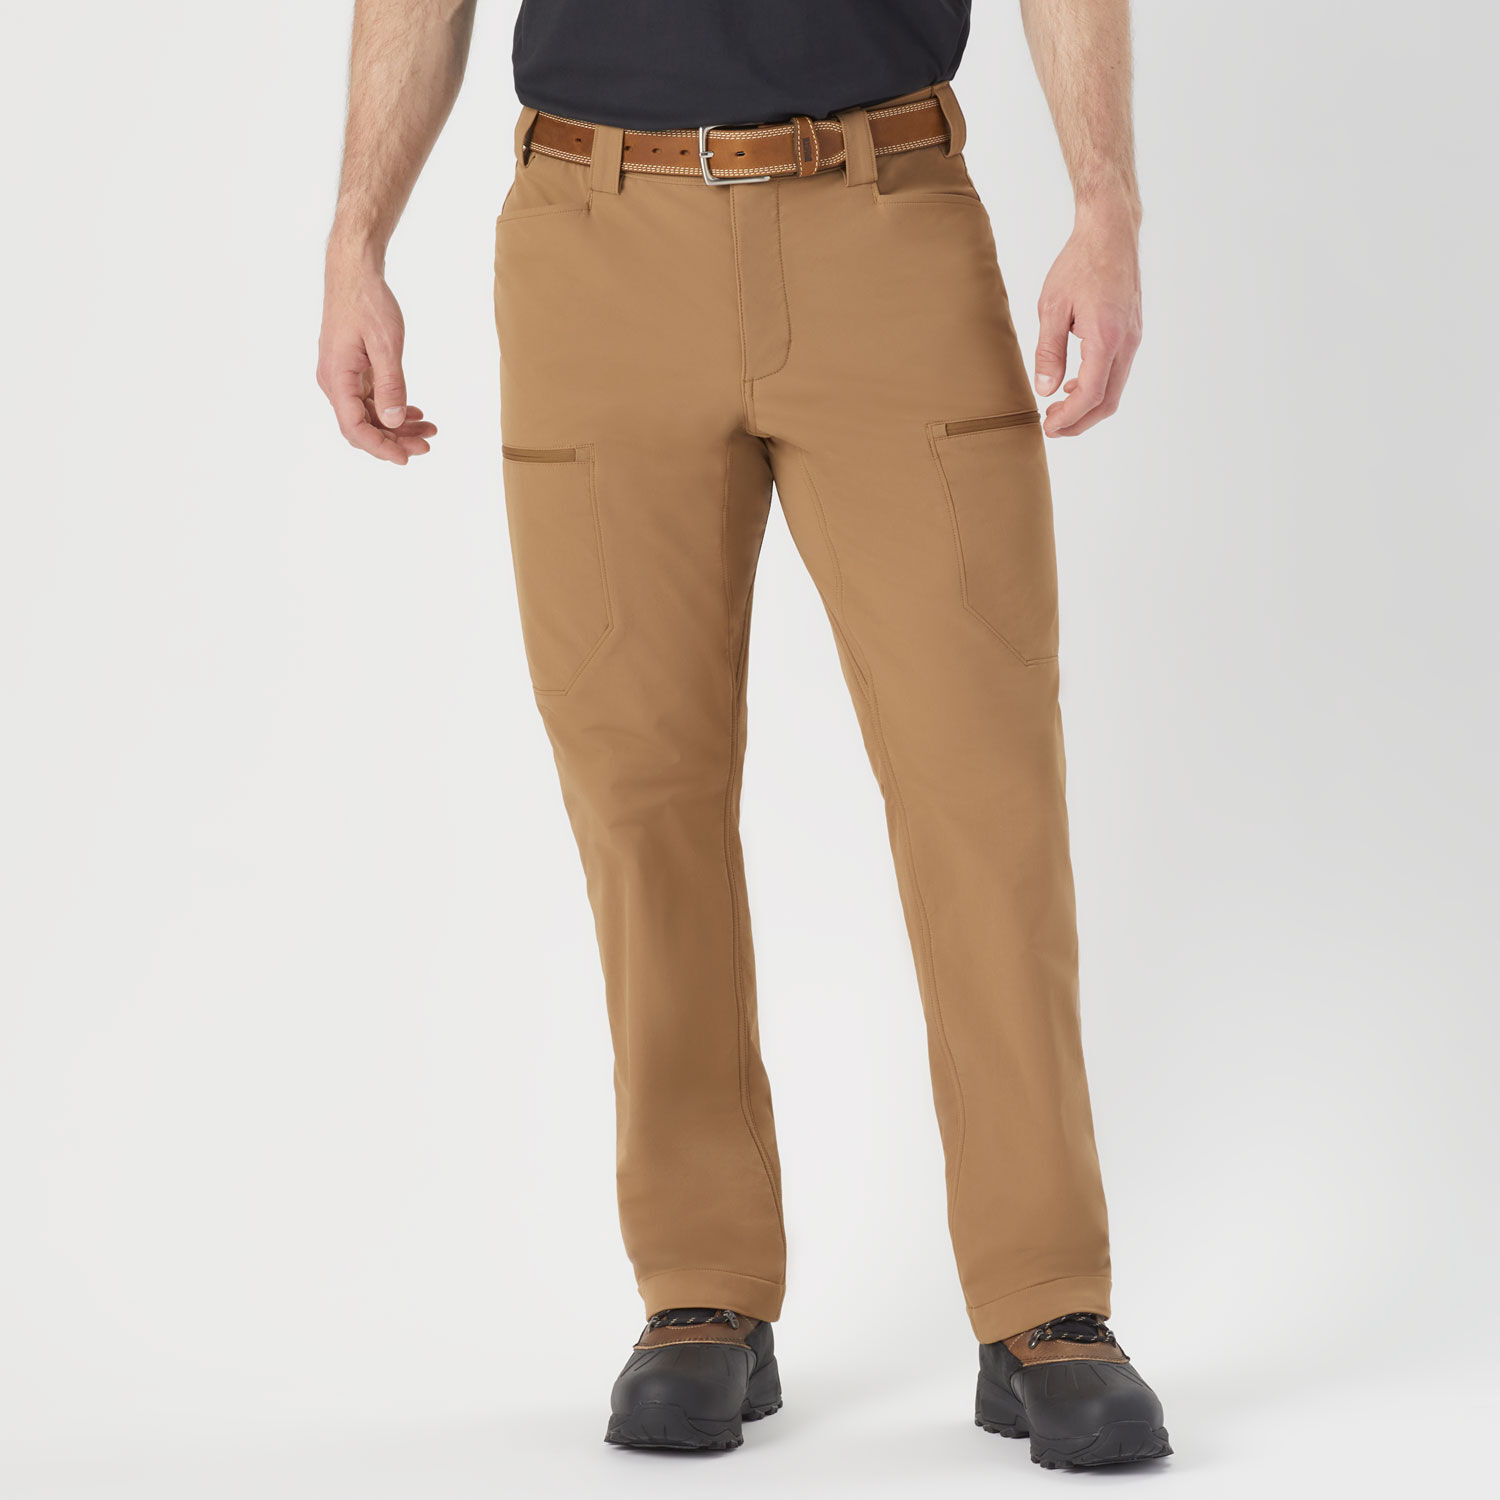 Men's Flexpedition Standard Fit Lined Cargo Pants | Duluth Trading Company